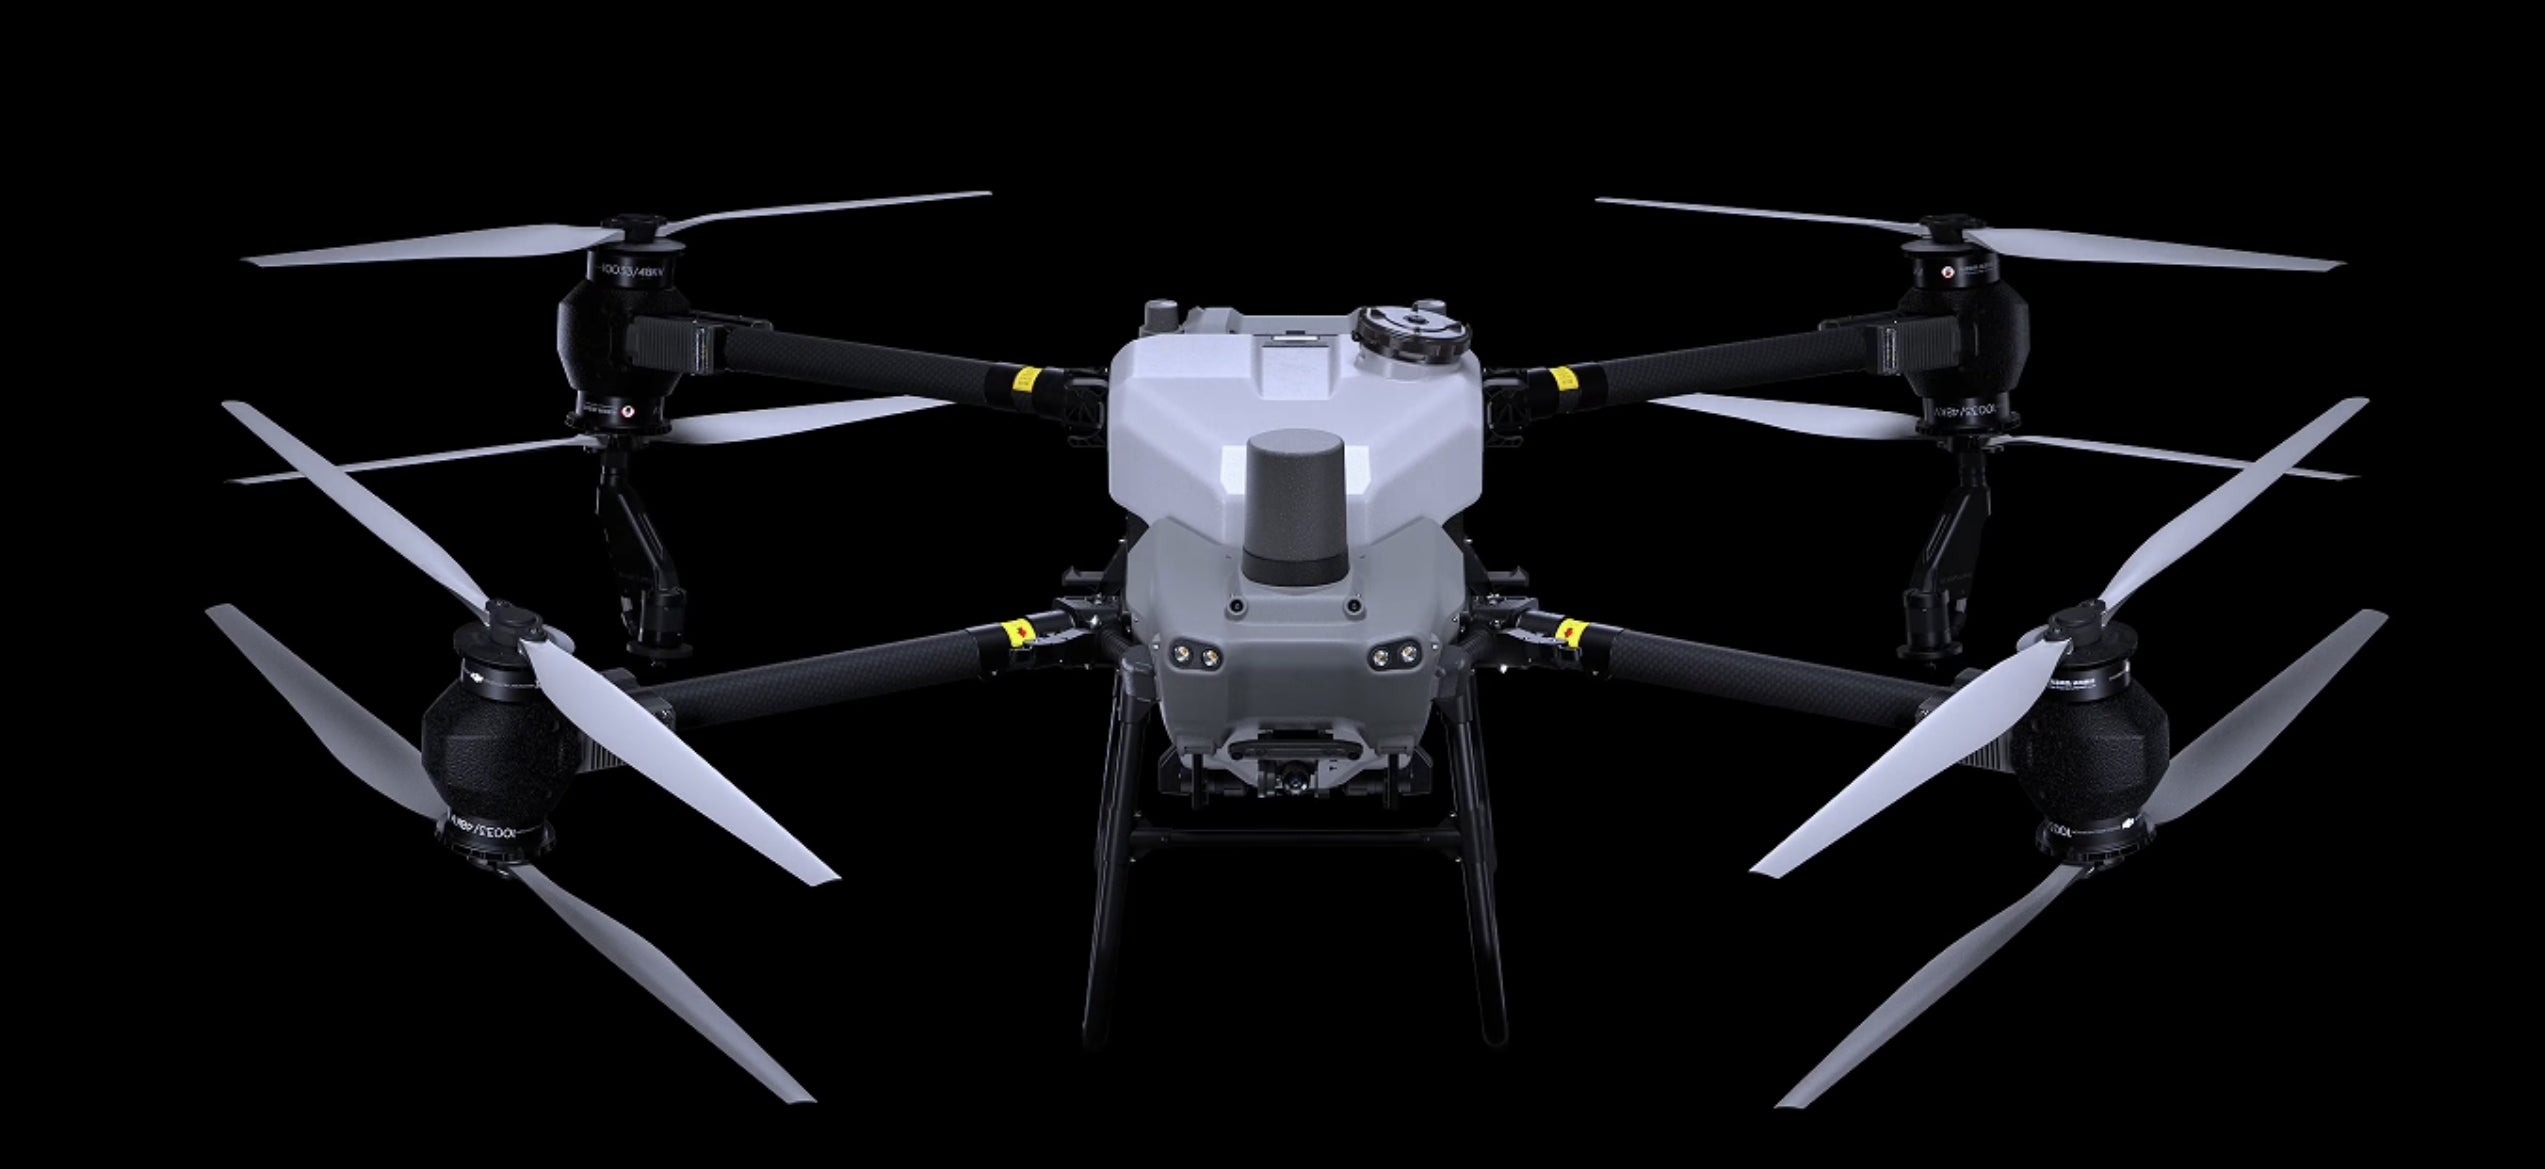 DJI Agras T50 , High-stability agricultural equipment for spraying and spreading with heavy payloads.